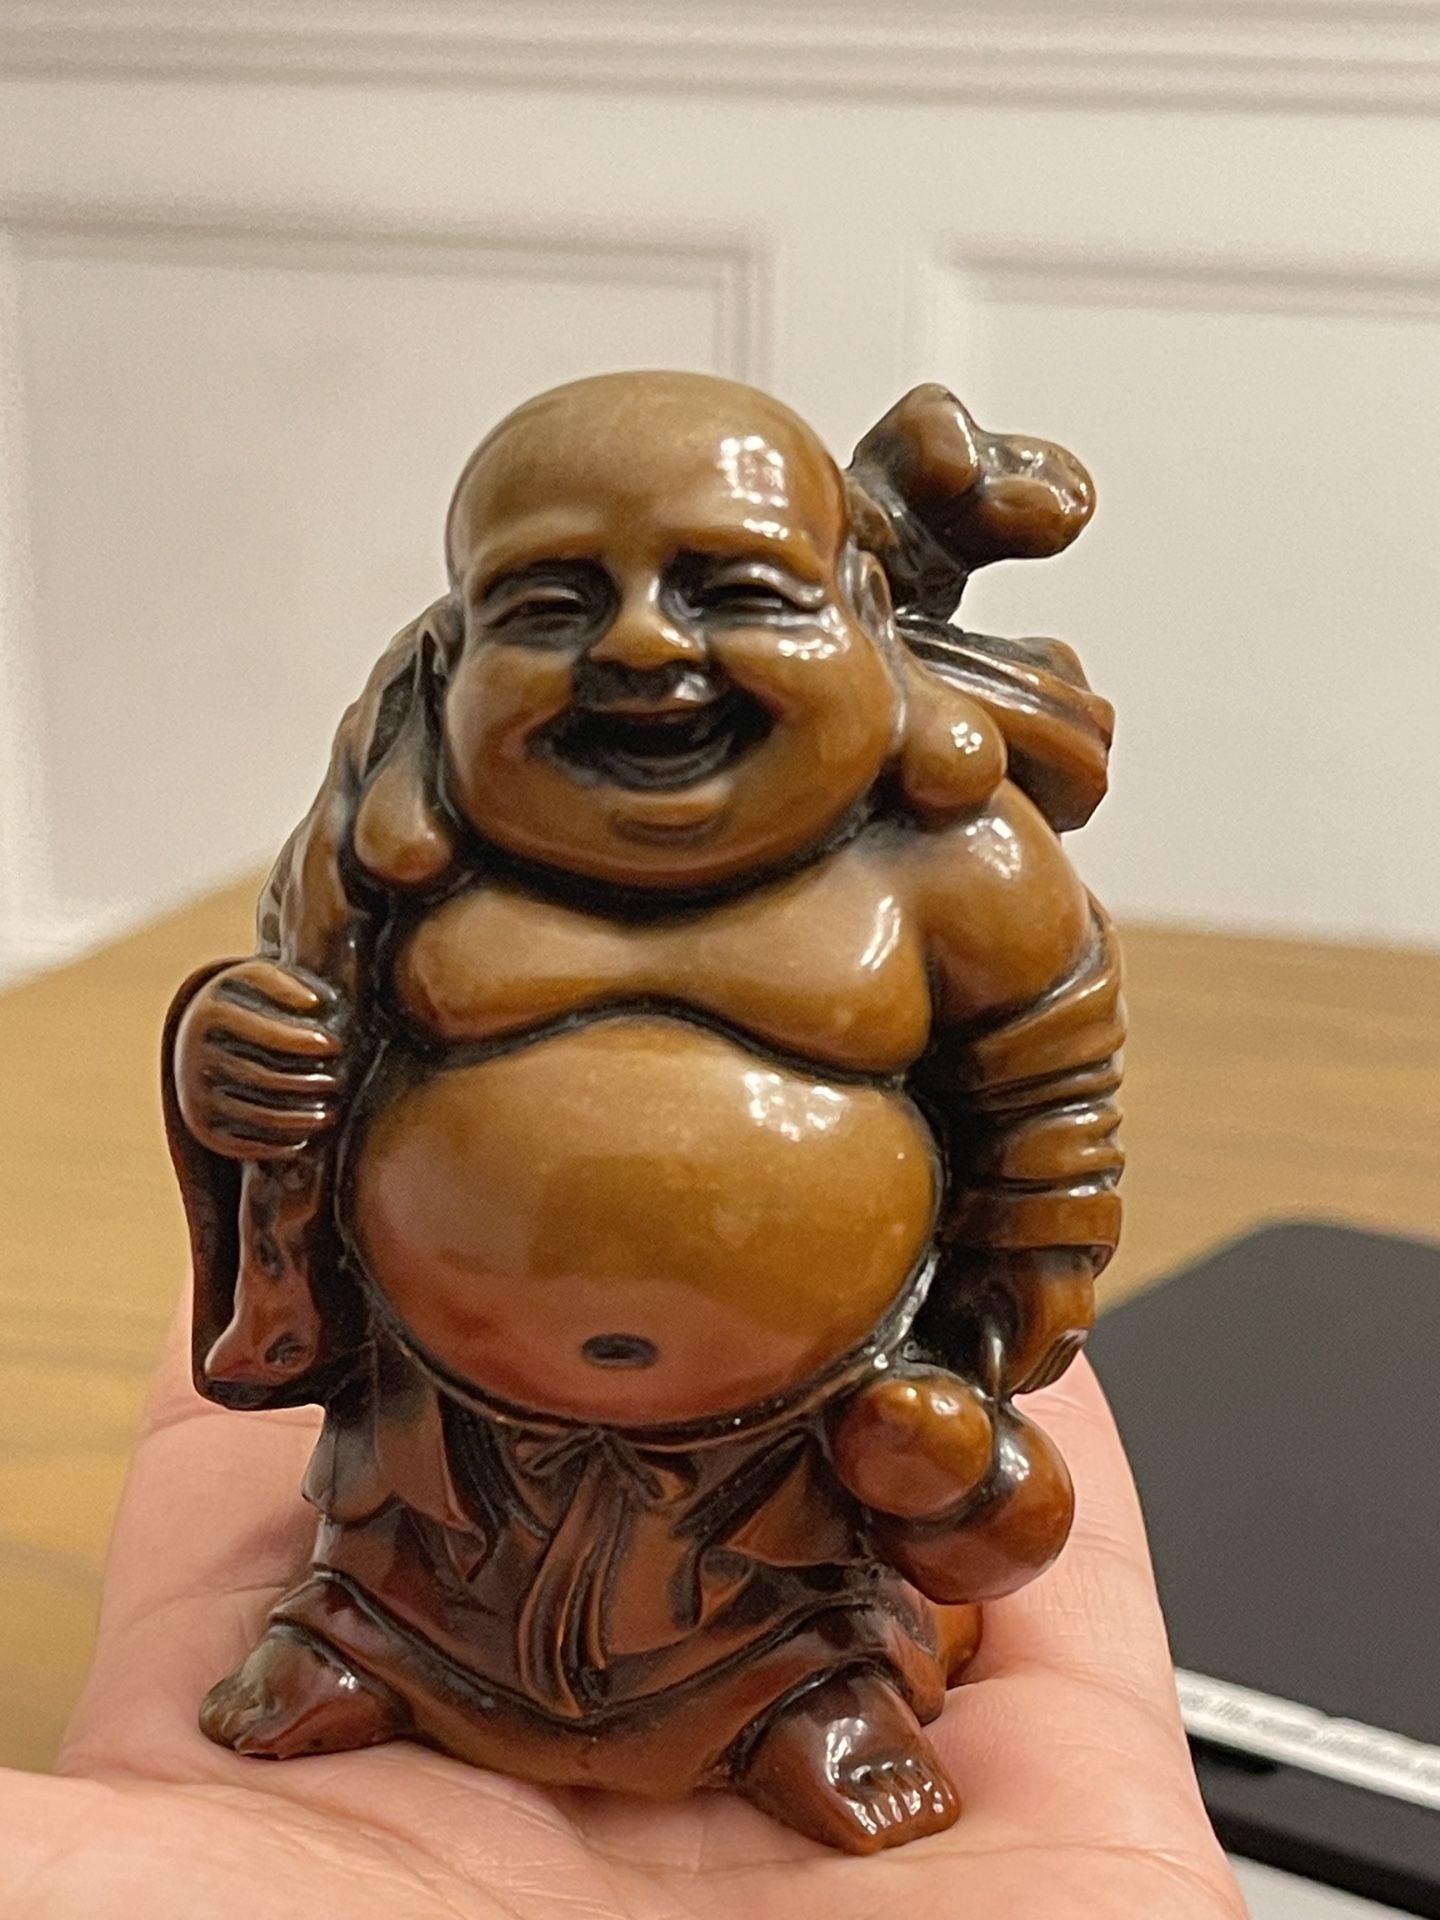 China  Collect  BROWN RESIN Laughing Buddha Happy Figurine 3 ” tall